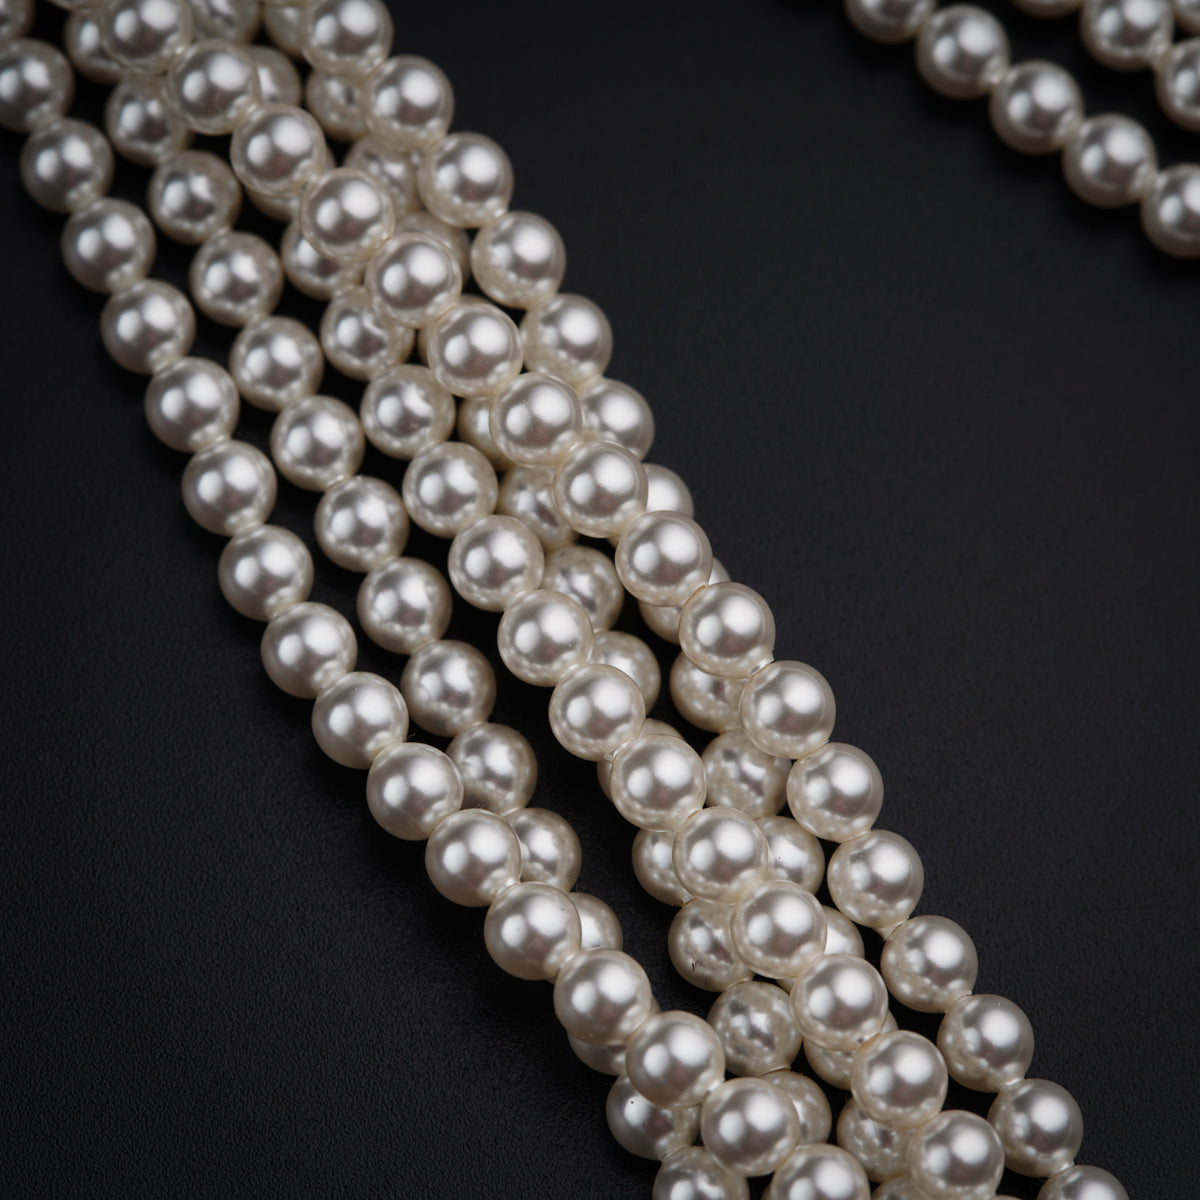 a close up of pearls on a black surface